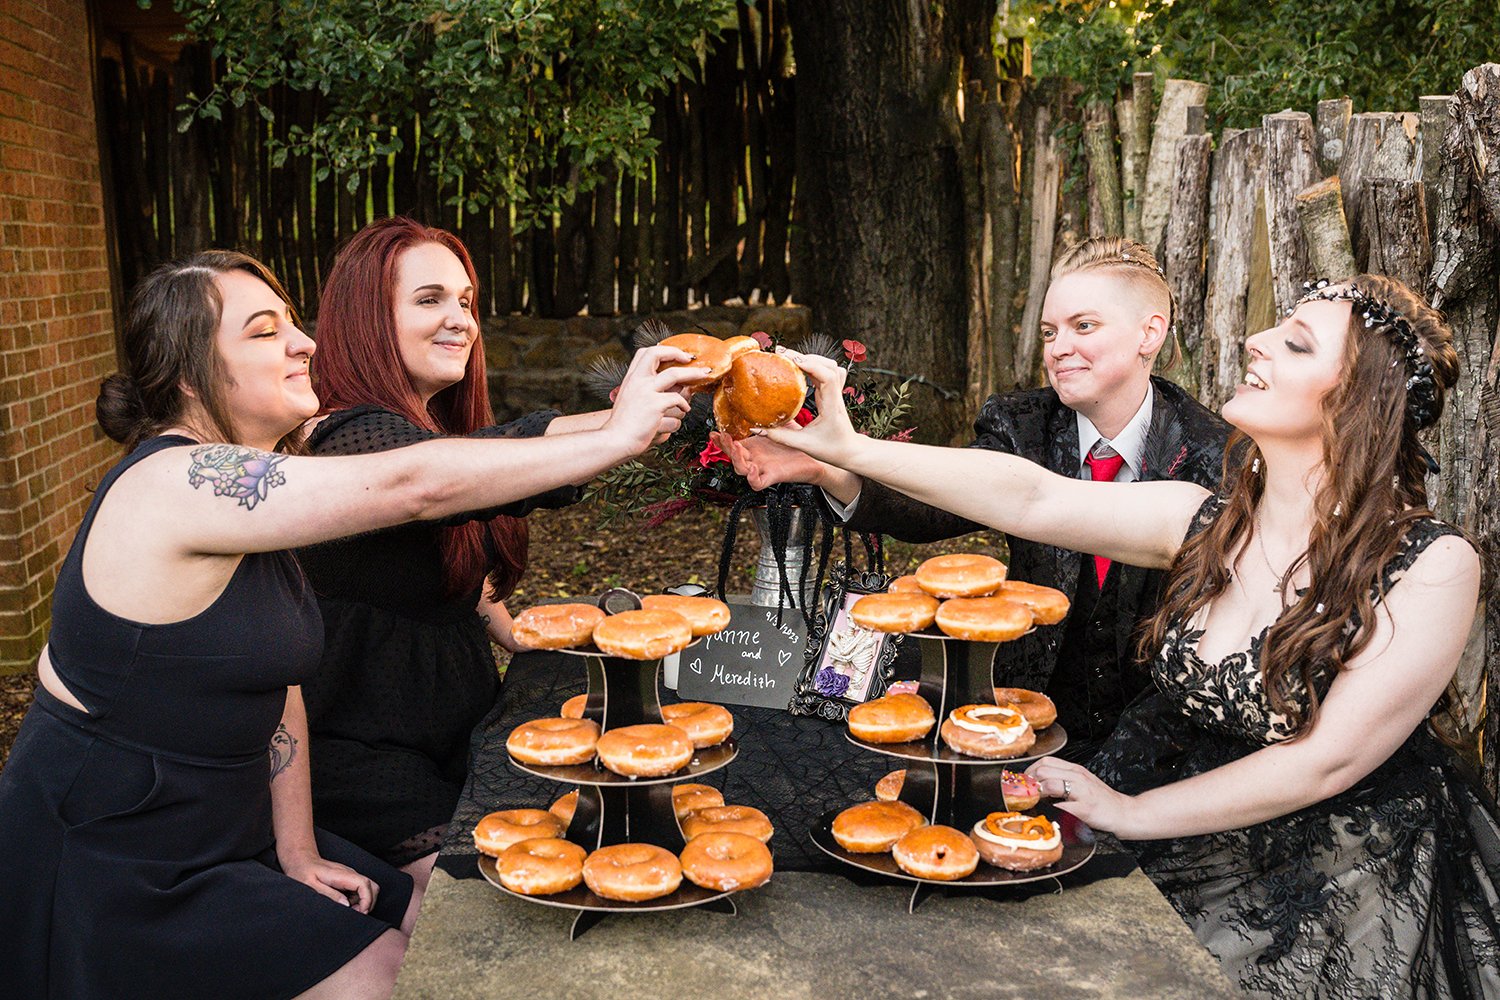 A newlywed queer couple "toast" donuts with their wedding party members in the backyard of an Airbnb for their wedding.